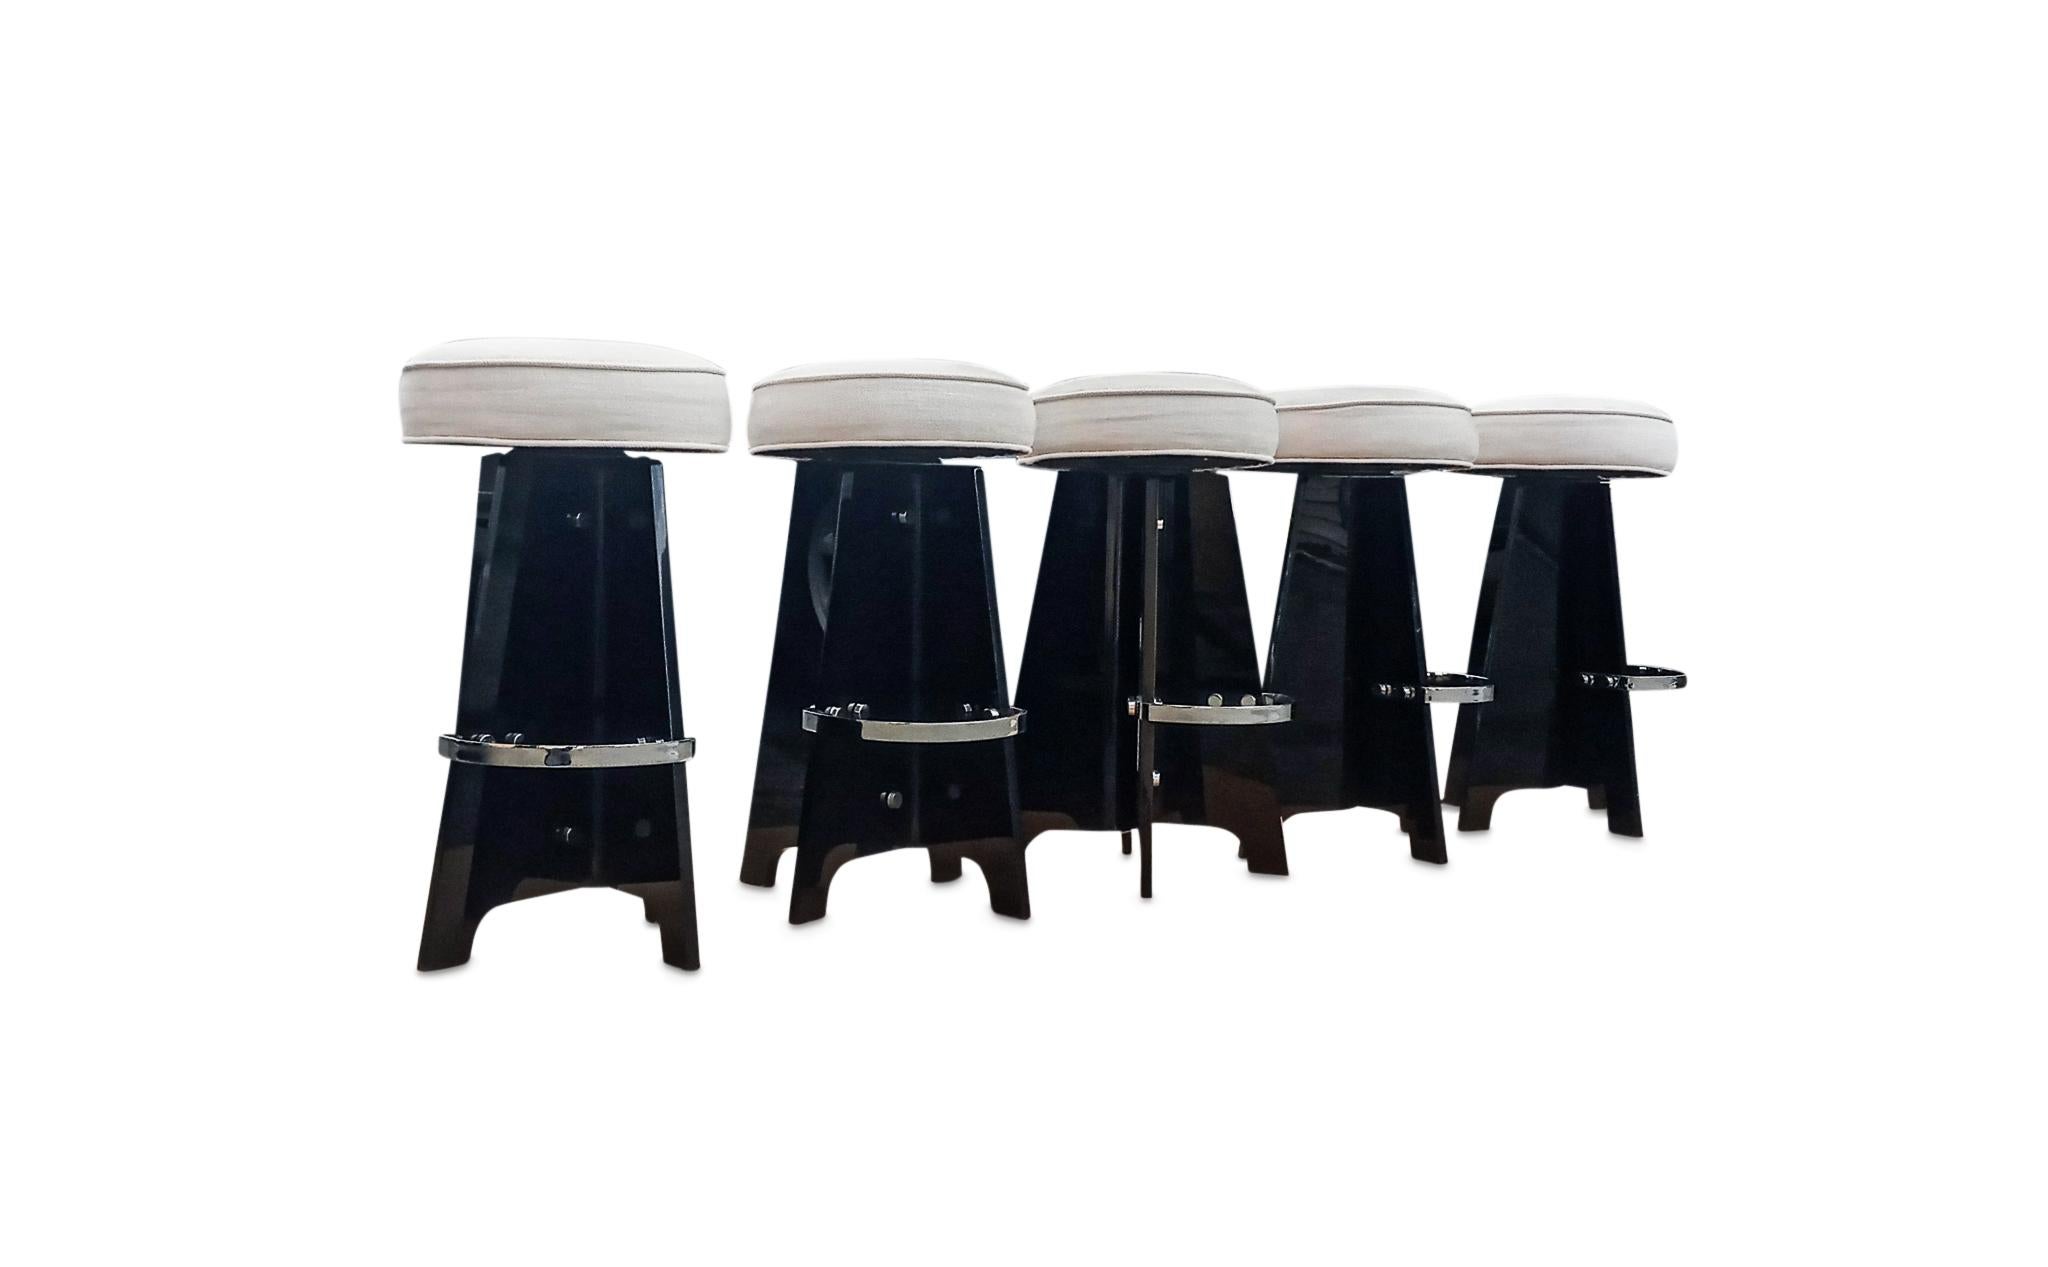 For your consideration is this super cool Space-Age styled acrylic or lucite bar stool set of five, by Verano, in rarely seen solid black. The genius of this original design is the folding of two thick & heavy lucite slabs styled to make four legs